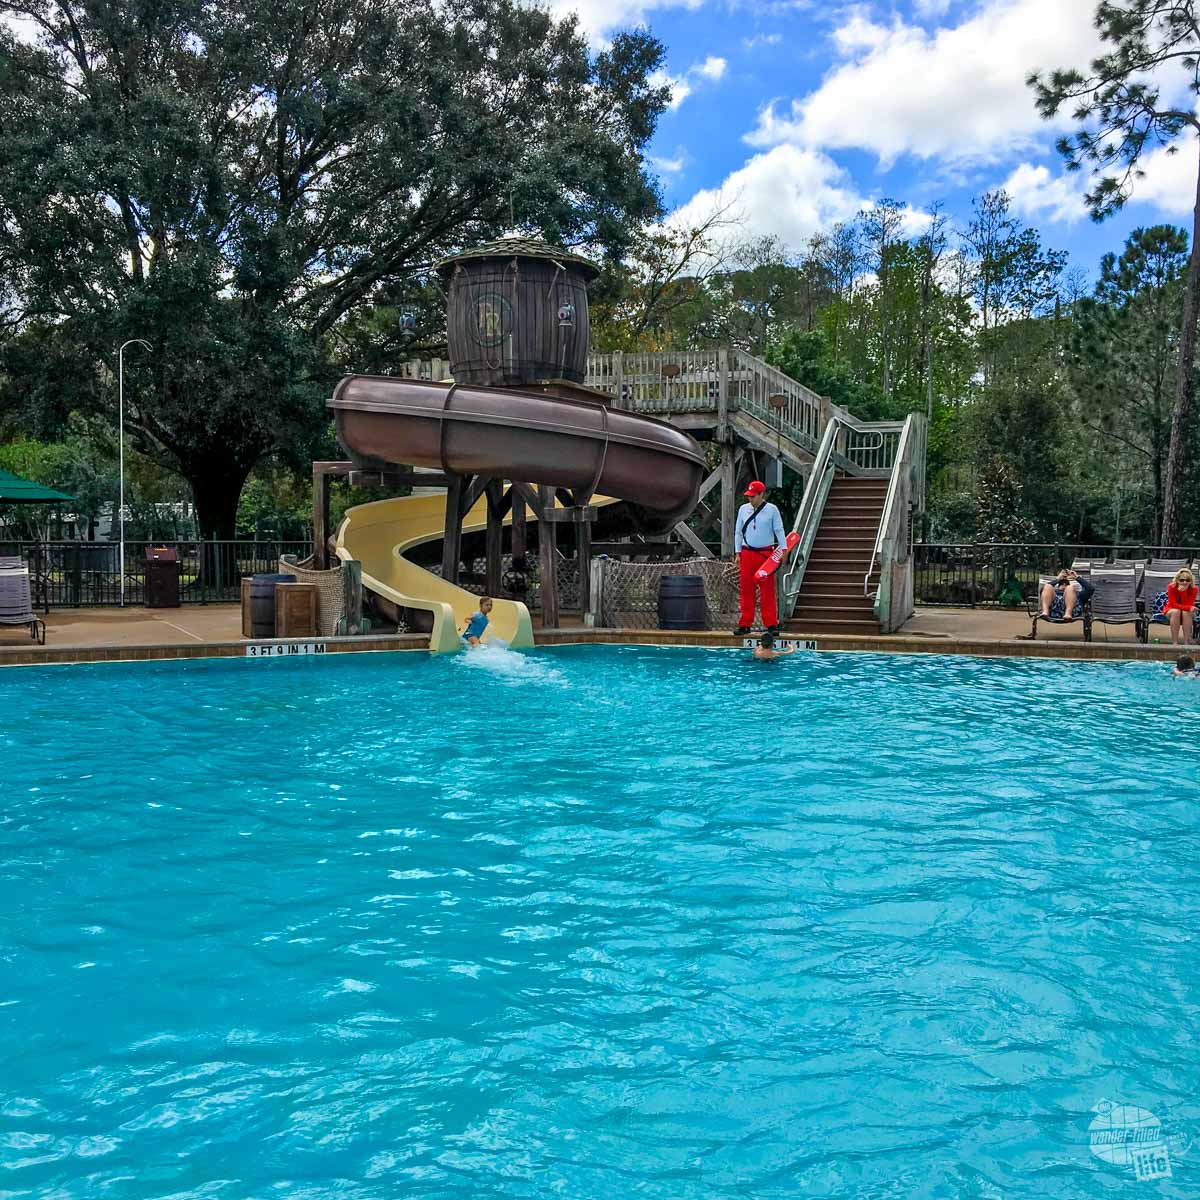 The pool at the Fort Wilderness Campground proved irresitable to the girls.